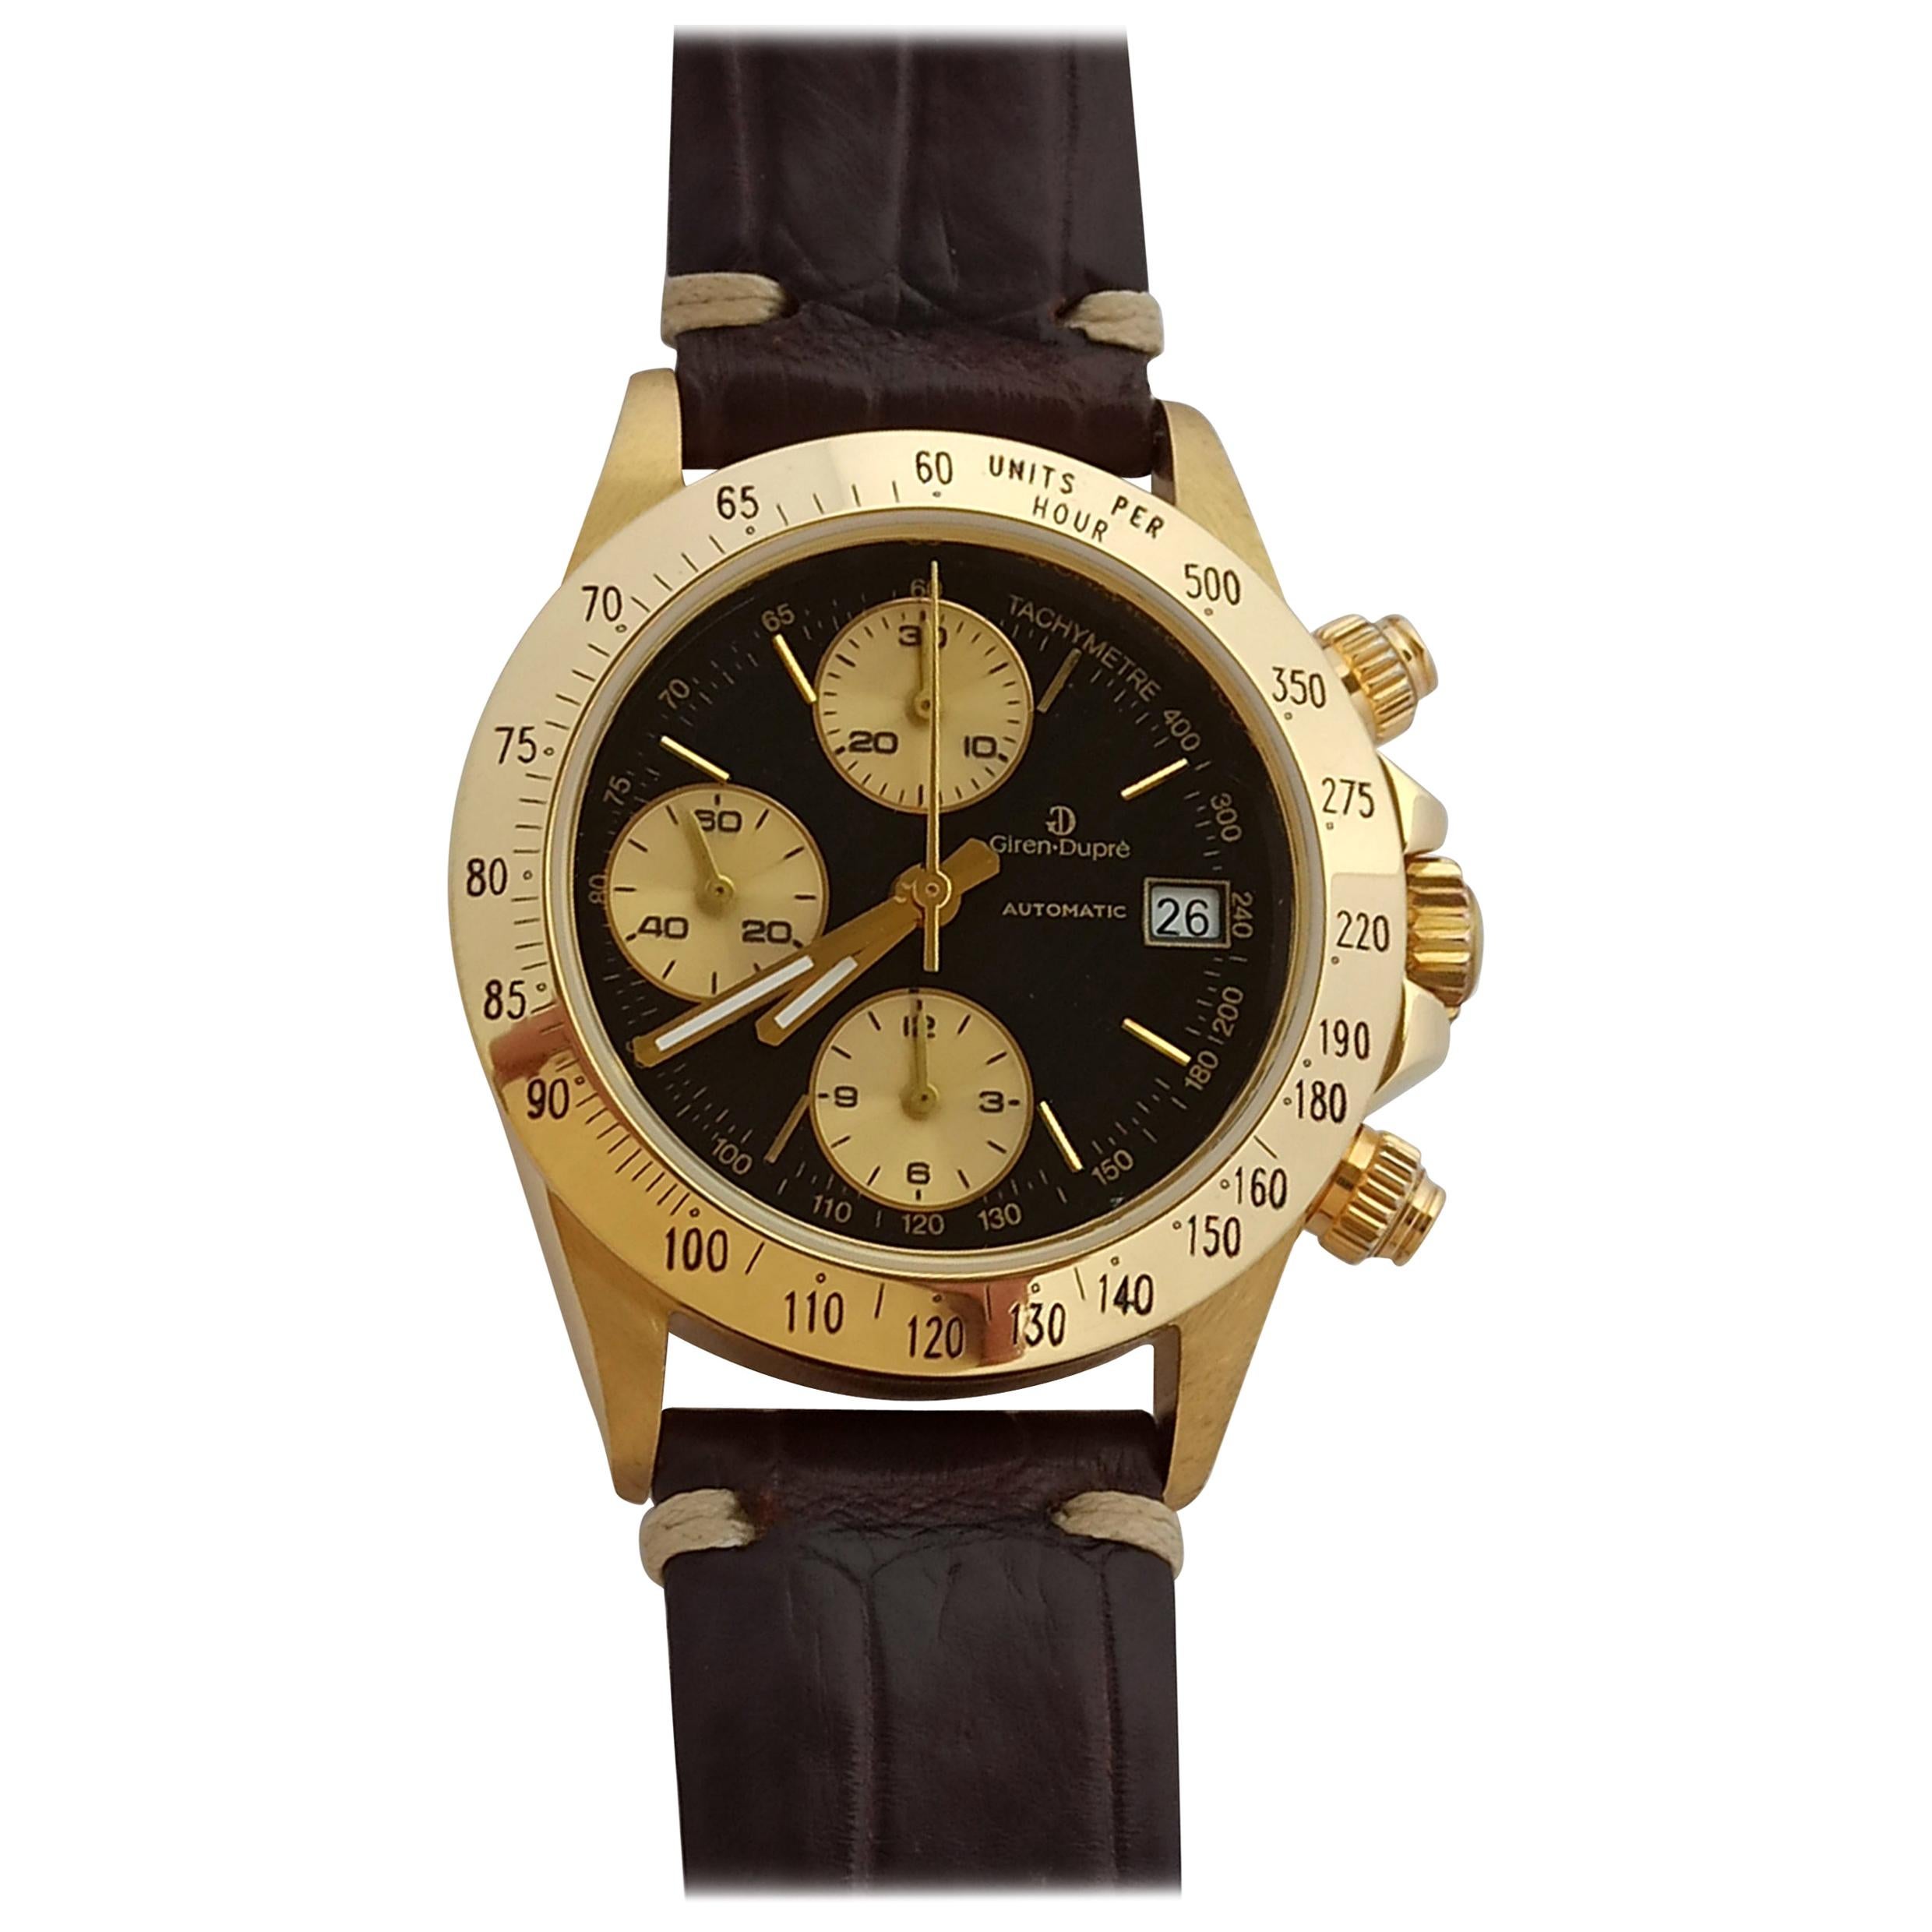 Giren Dupre' 18kt Solid Gold Daytona Style Chronograph, Leather Strap, Automatic For Sale